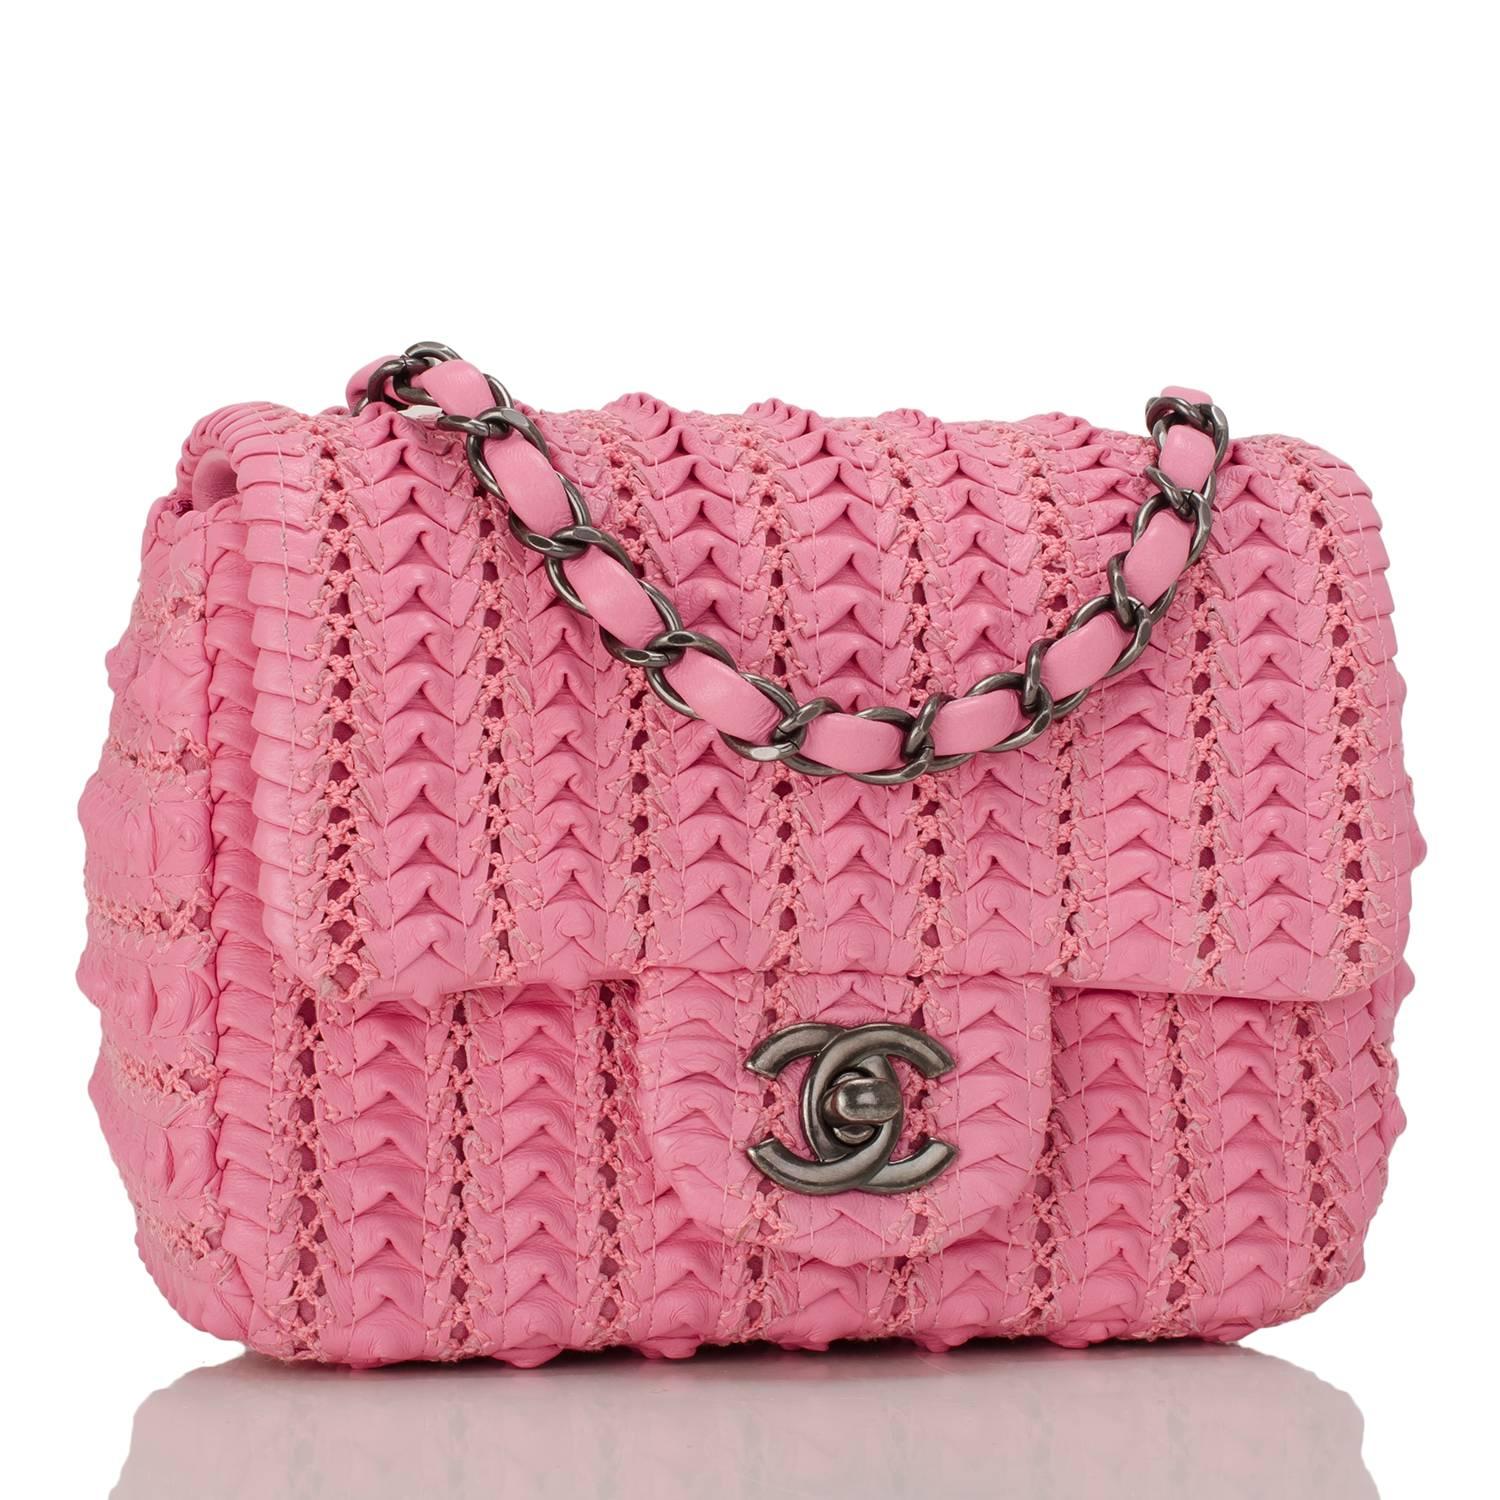 Chanel Square Mini Flap Bag of pink embroidered lambskin leather with ruthenium hardware.

This limited edition runway bag has a front flap with CC turnlock closure and an interwoven ruthenium chain link with pink leather shoulder/crossbody